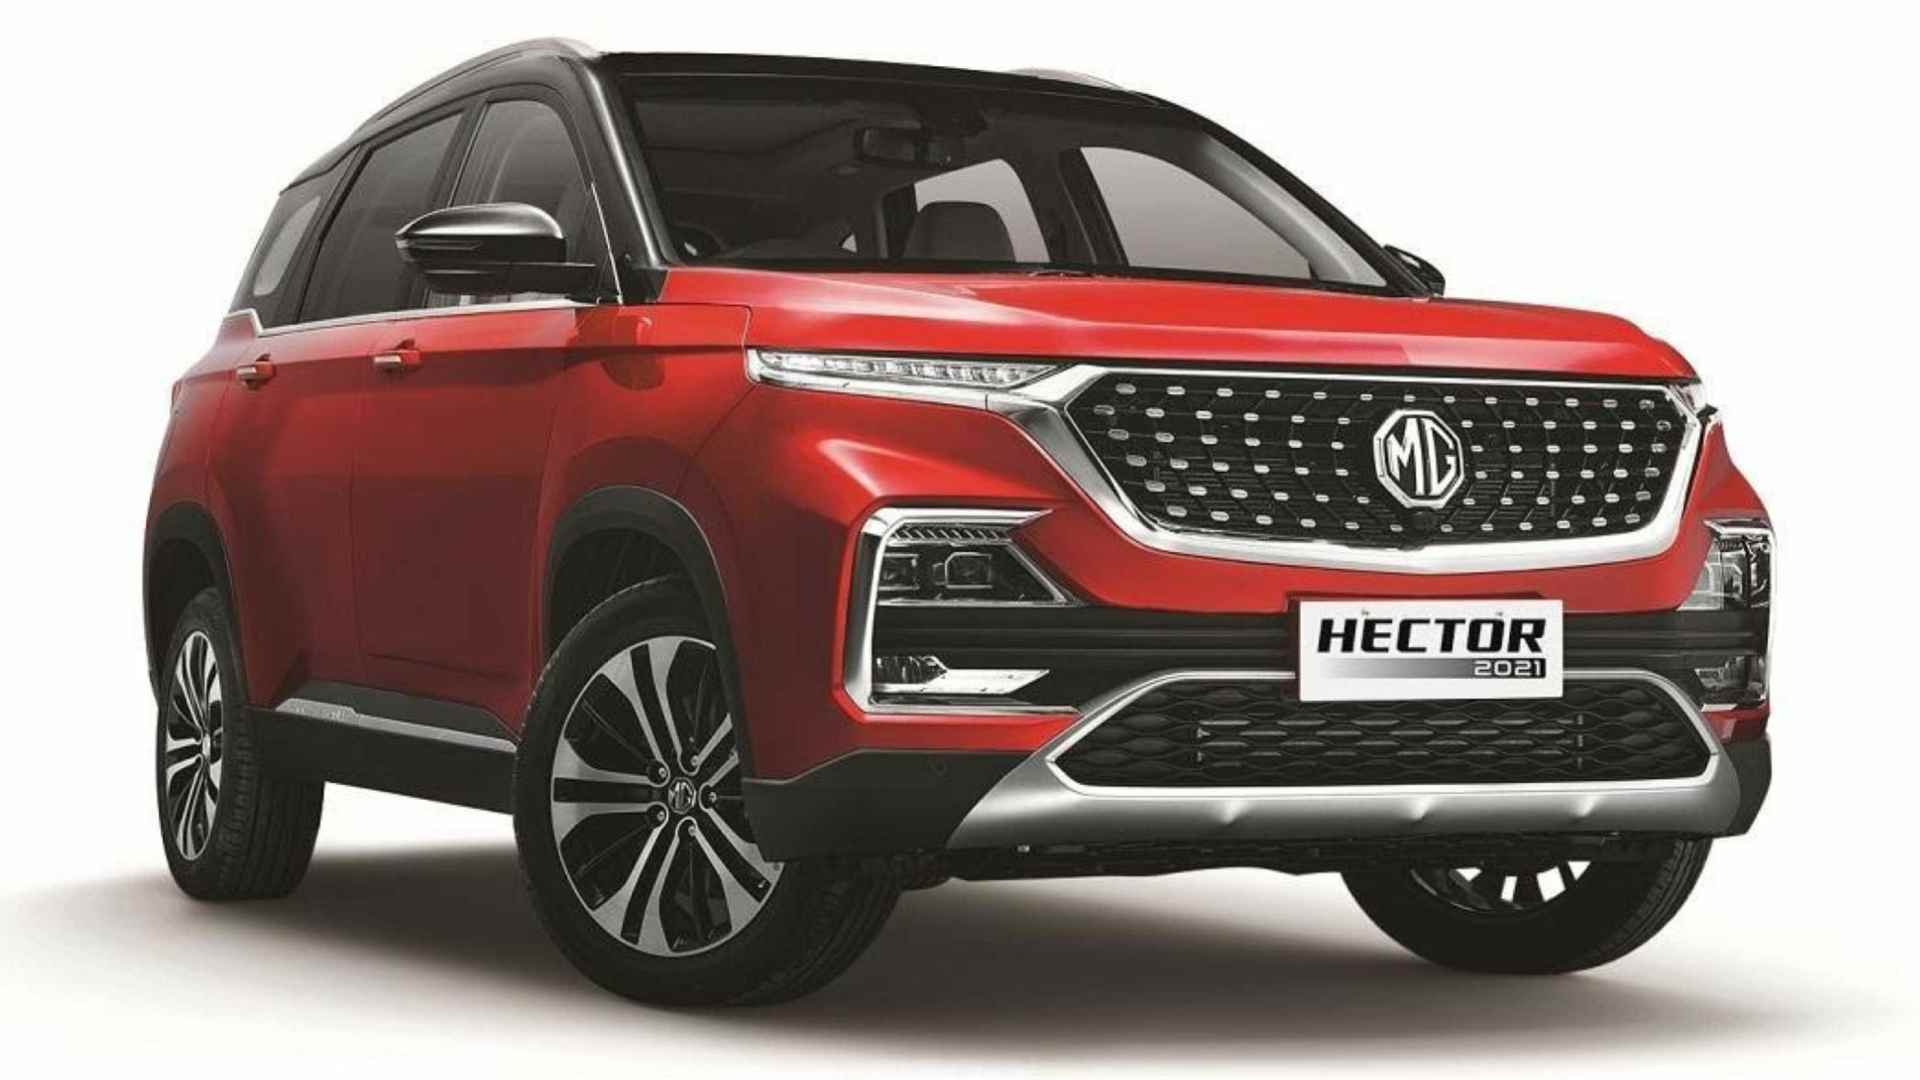 iCAT flagged a difference in emission levels for the MG Hector petrol-DCT model. Image: MG